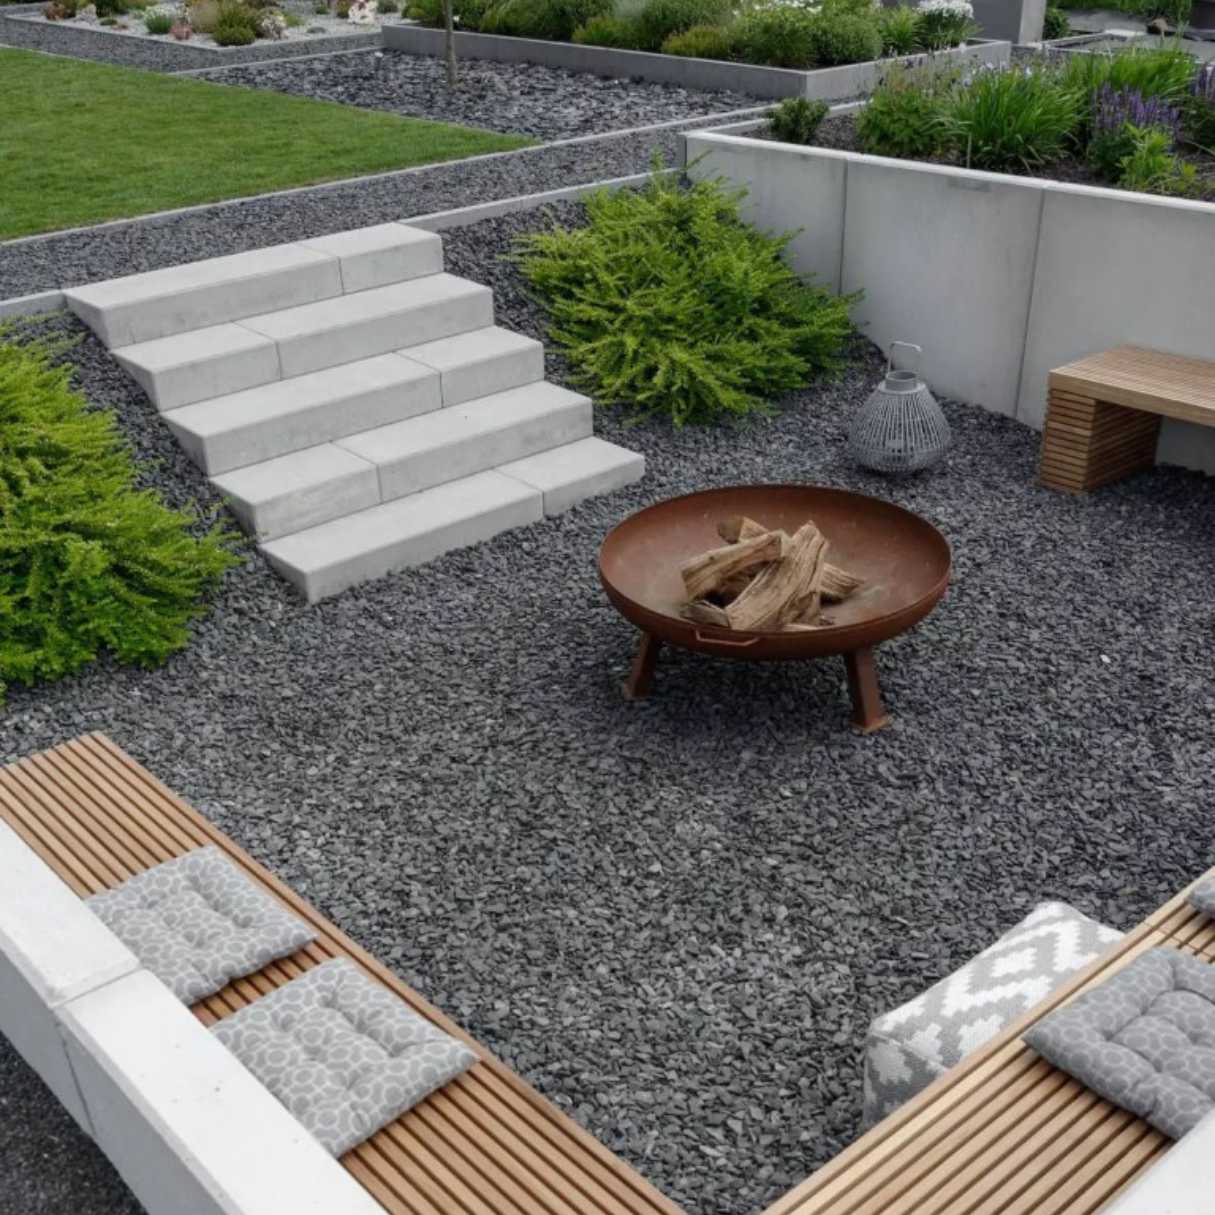 How To Build A Sunken Fire Pit